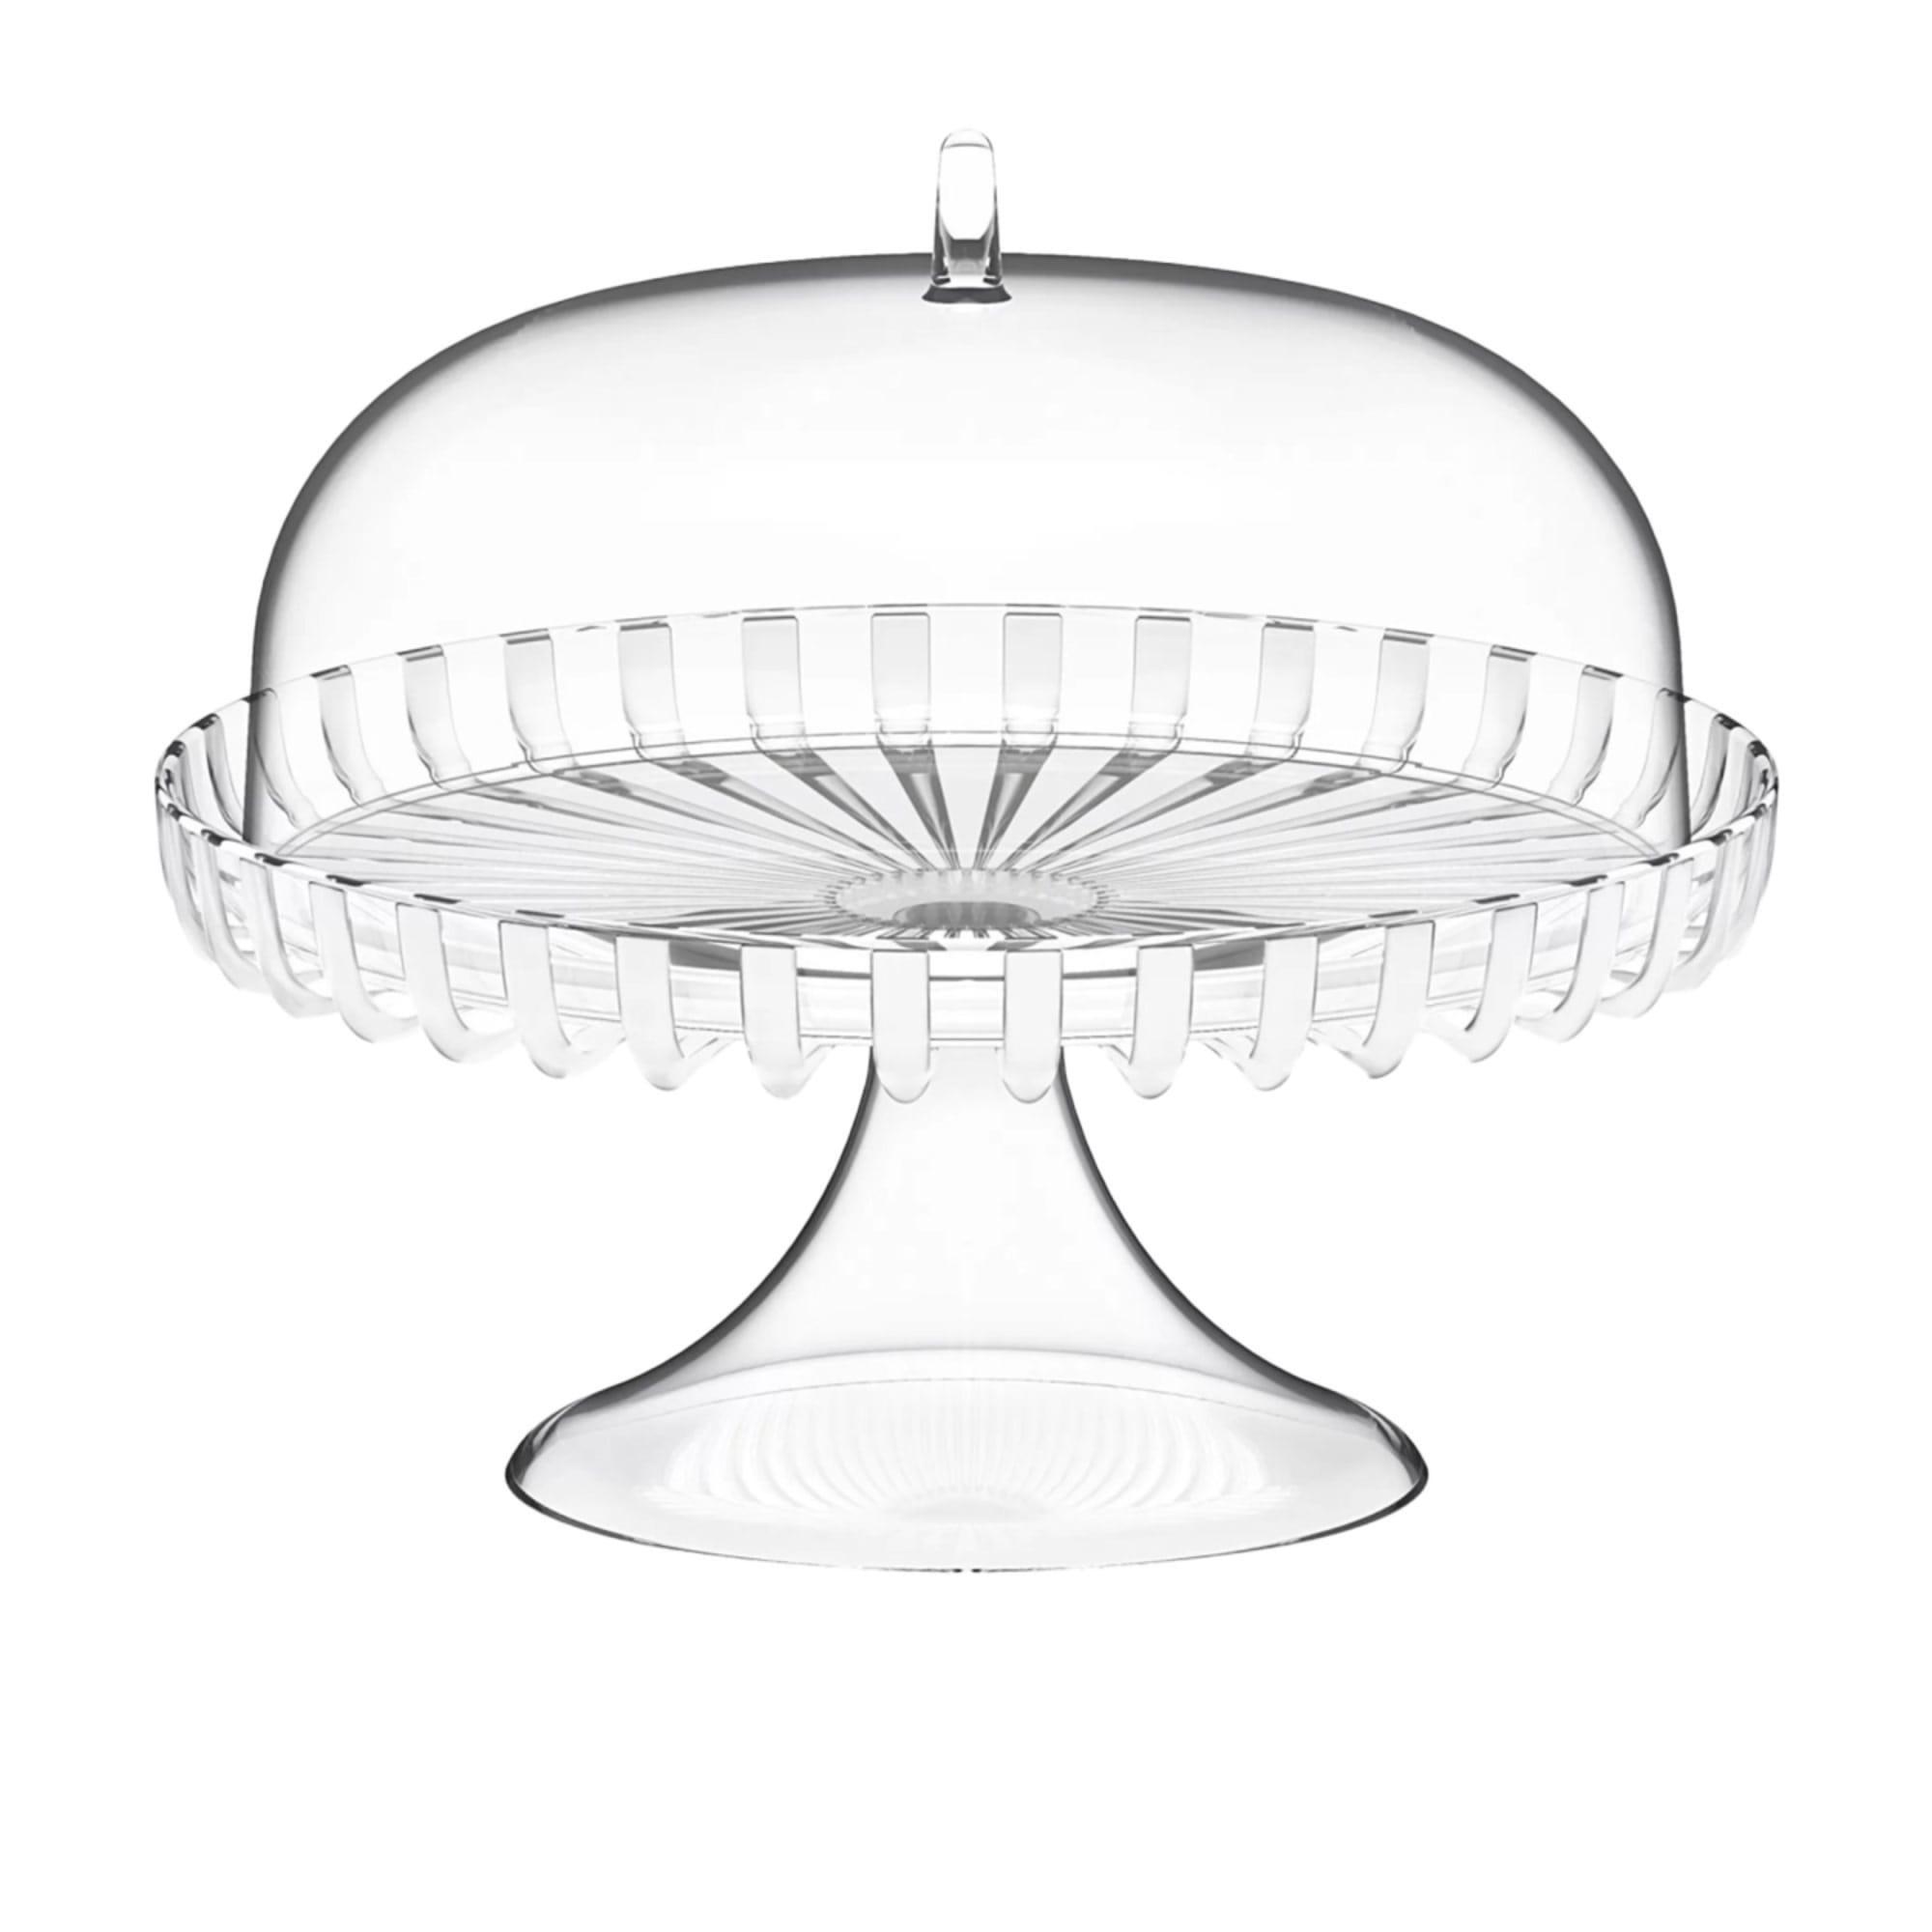 Guzzini Dolcevita Cake Stand with Dome 31cm Mother of Pearl Image 1